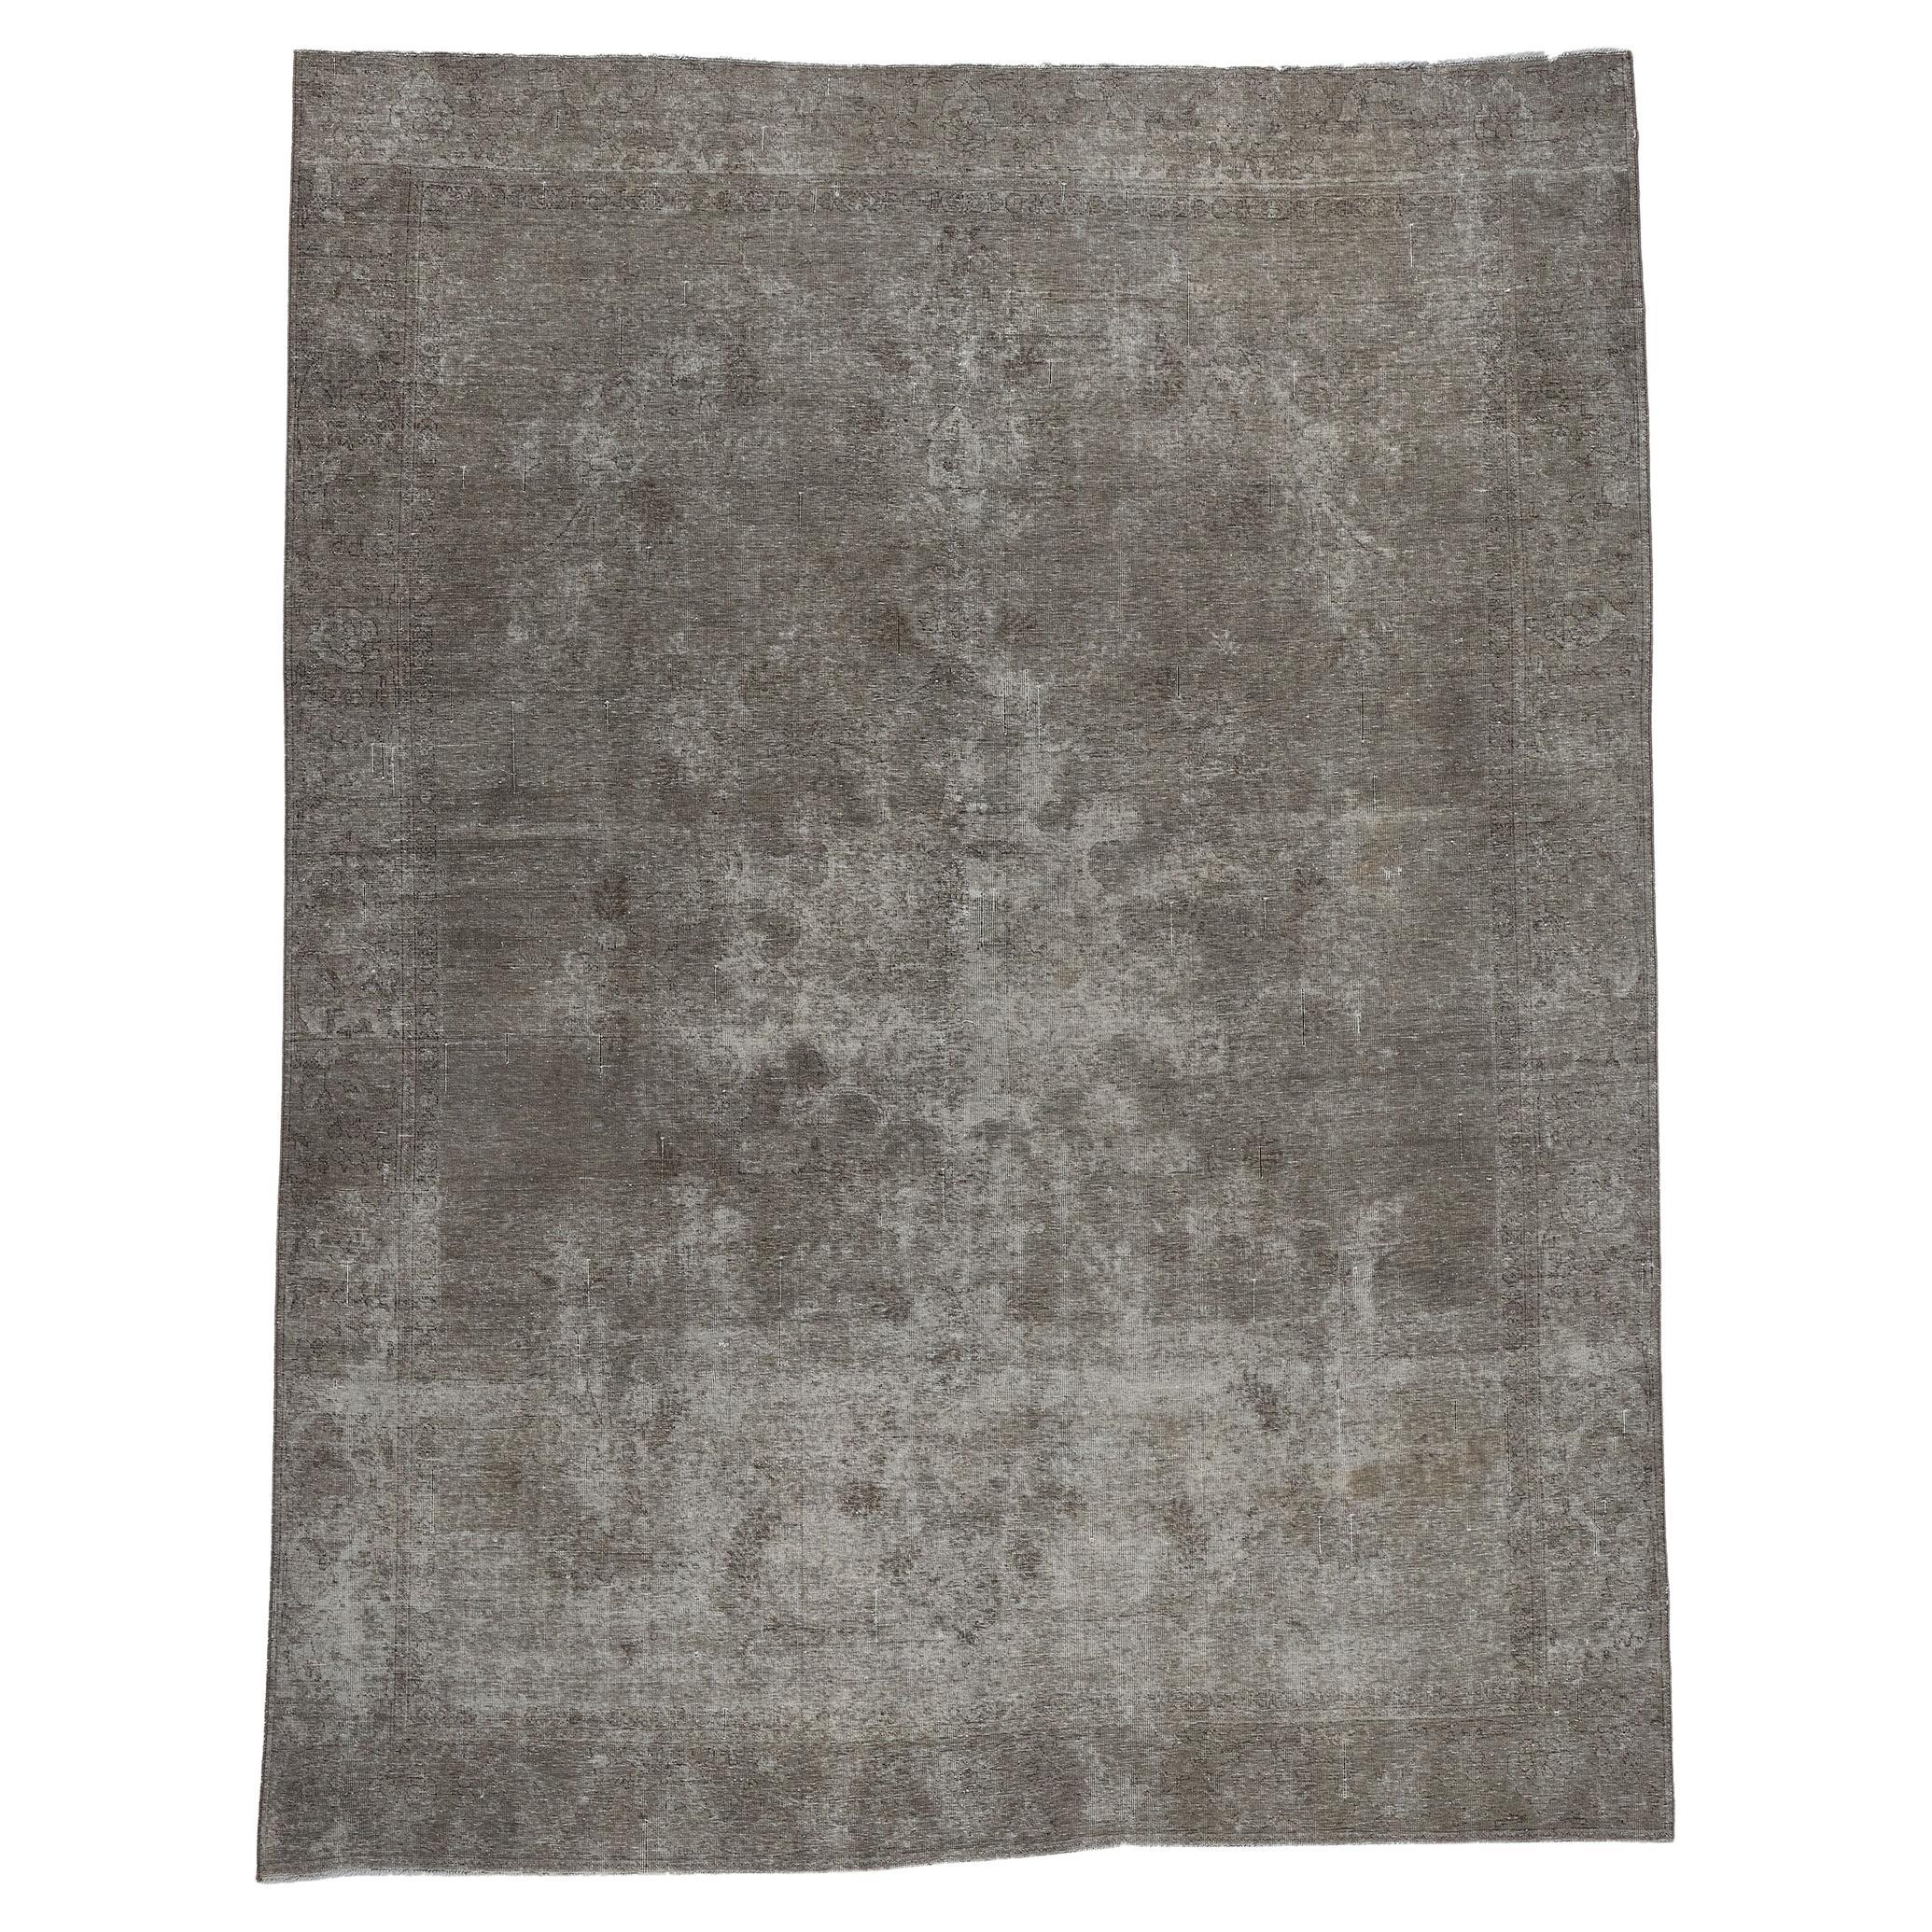 Vintage Persian Earth-Tone Overdyed Rug with Modern Luxe Industrial Loft Style